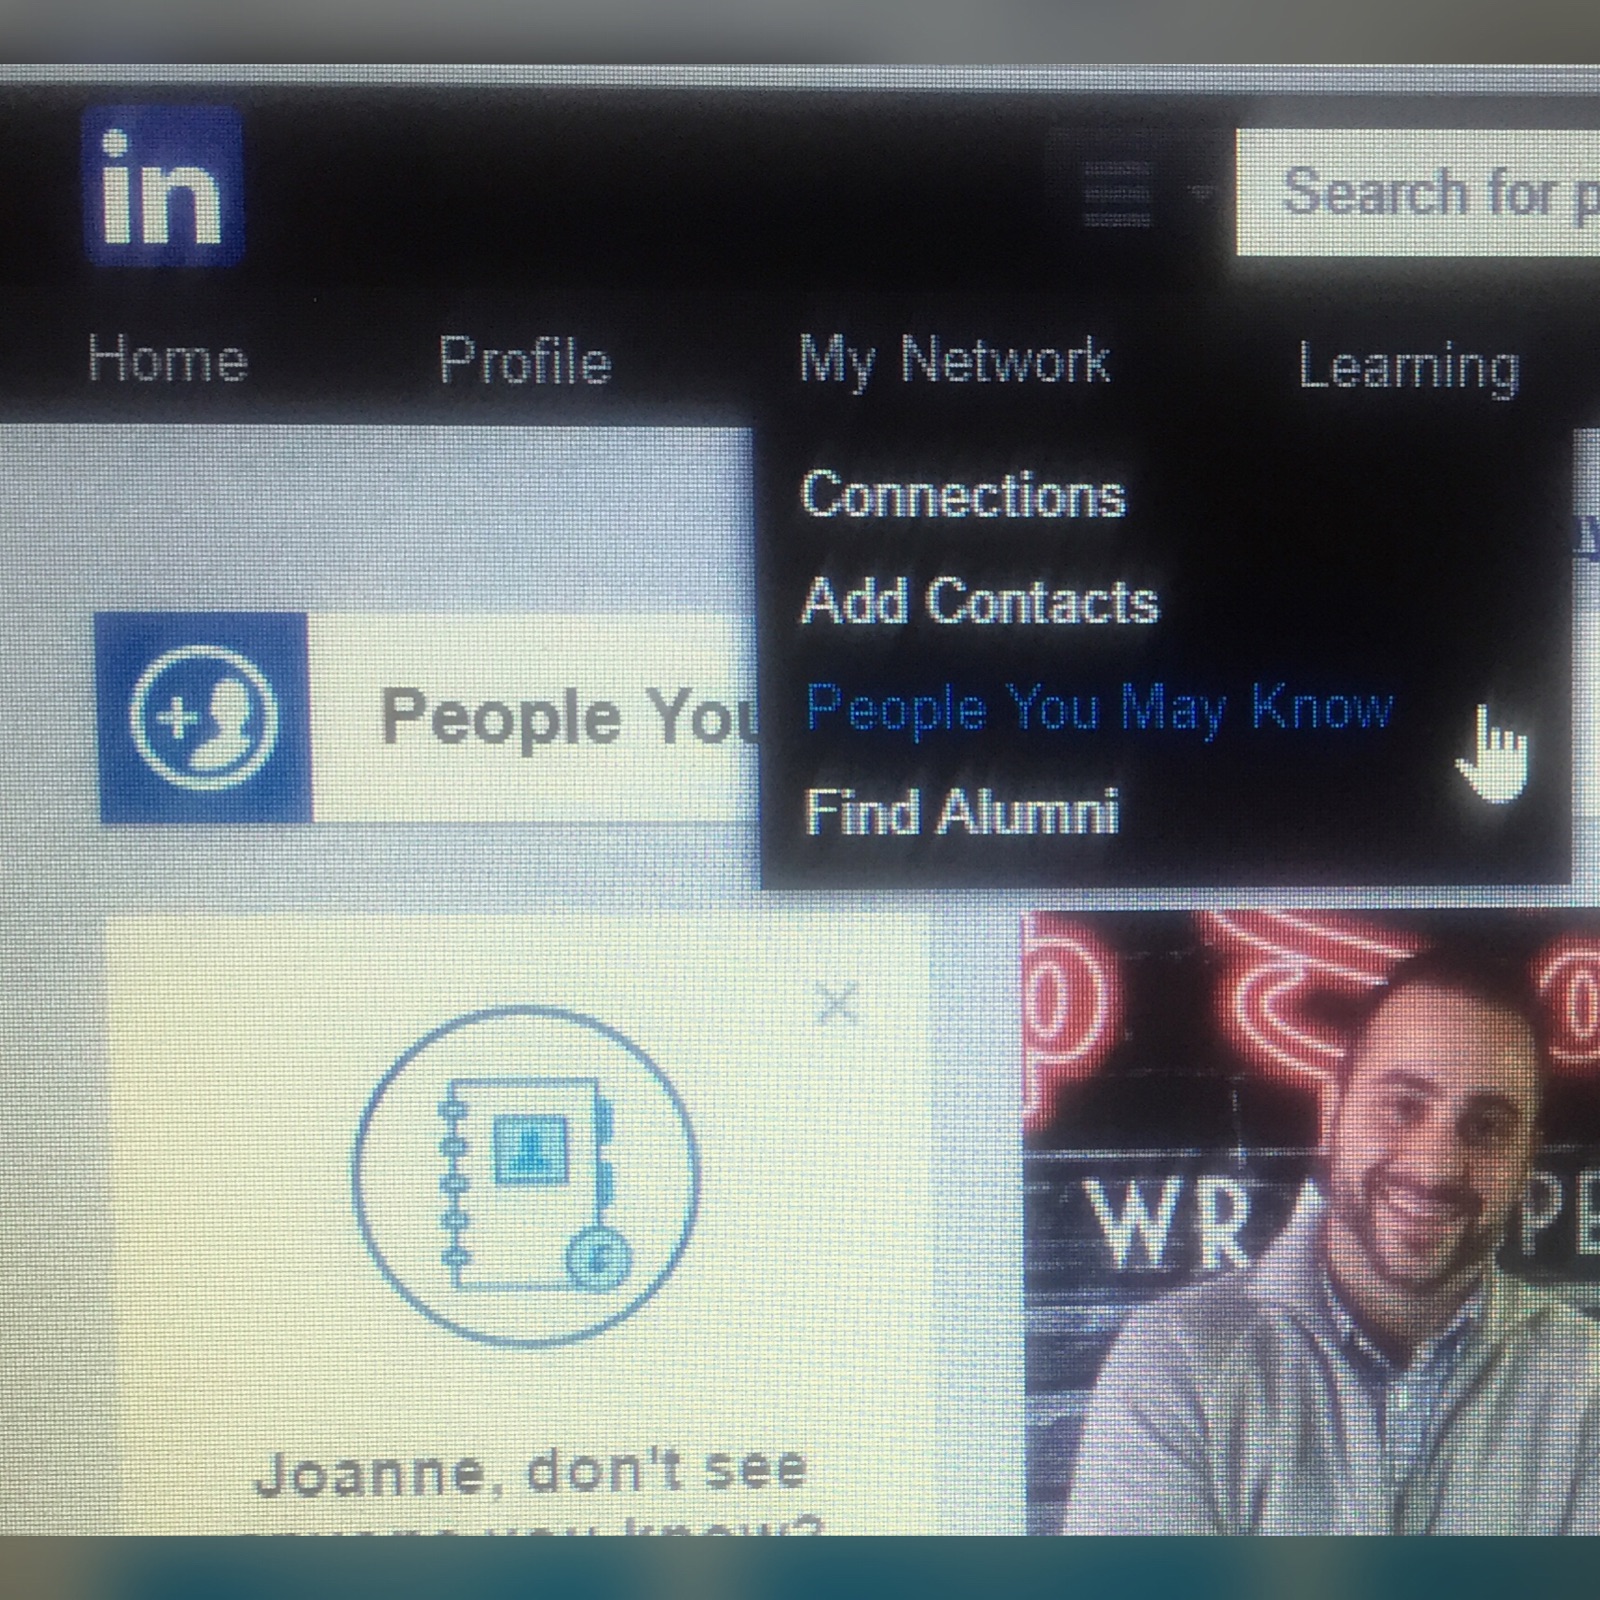 LinkedIn People You May Know Tool